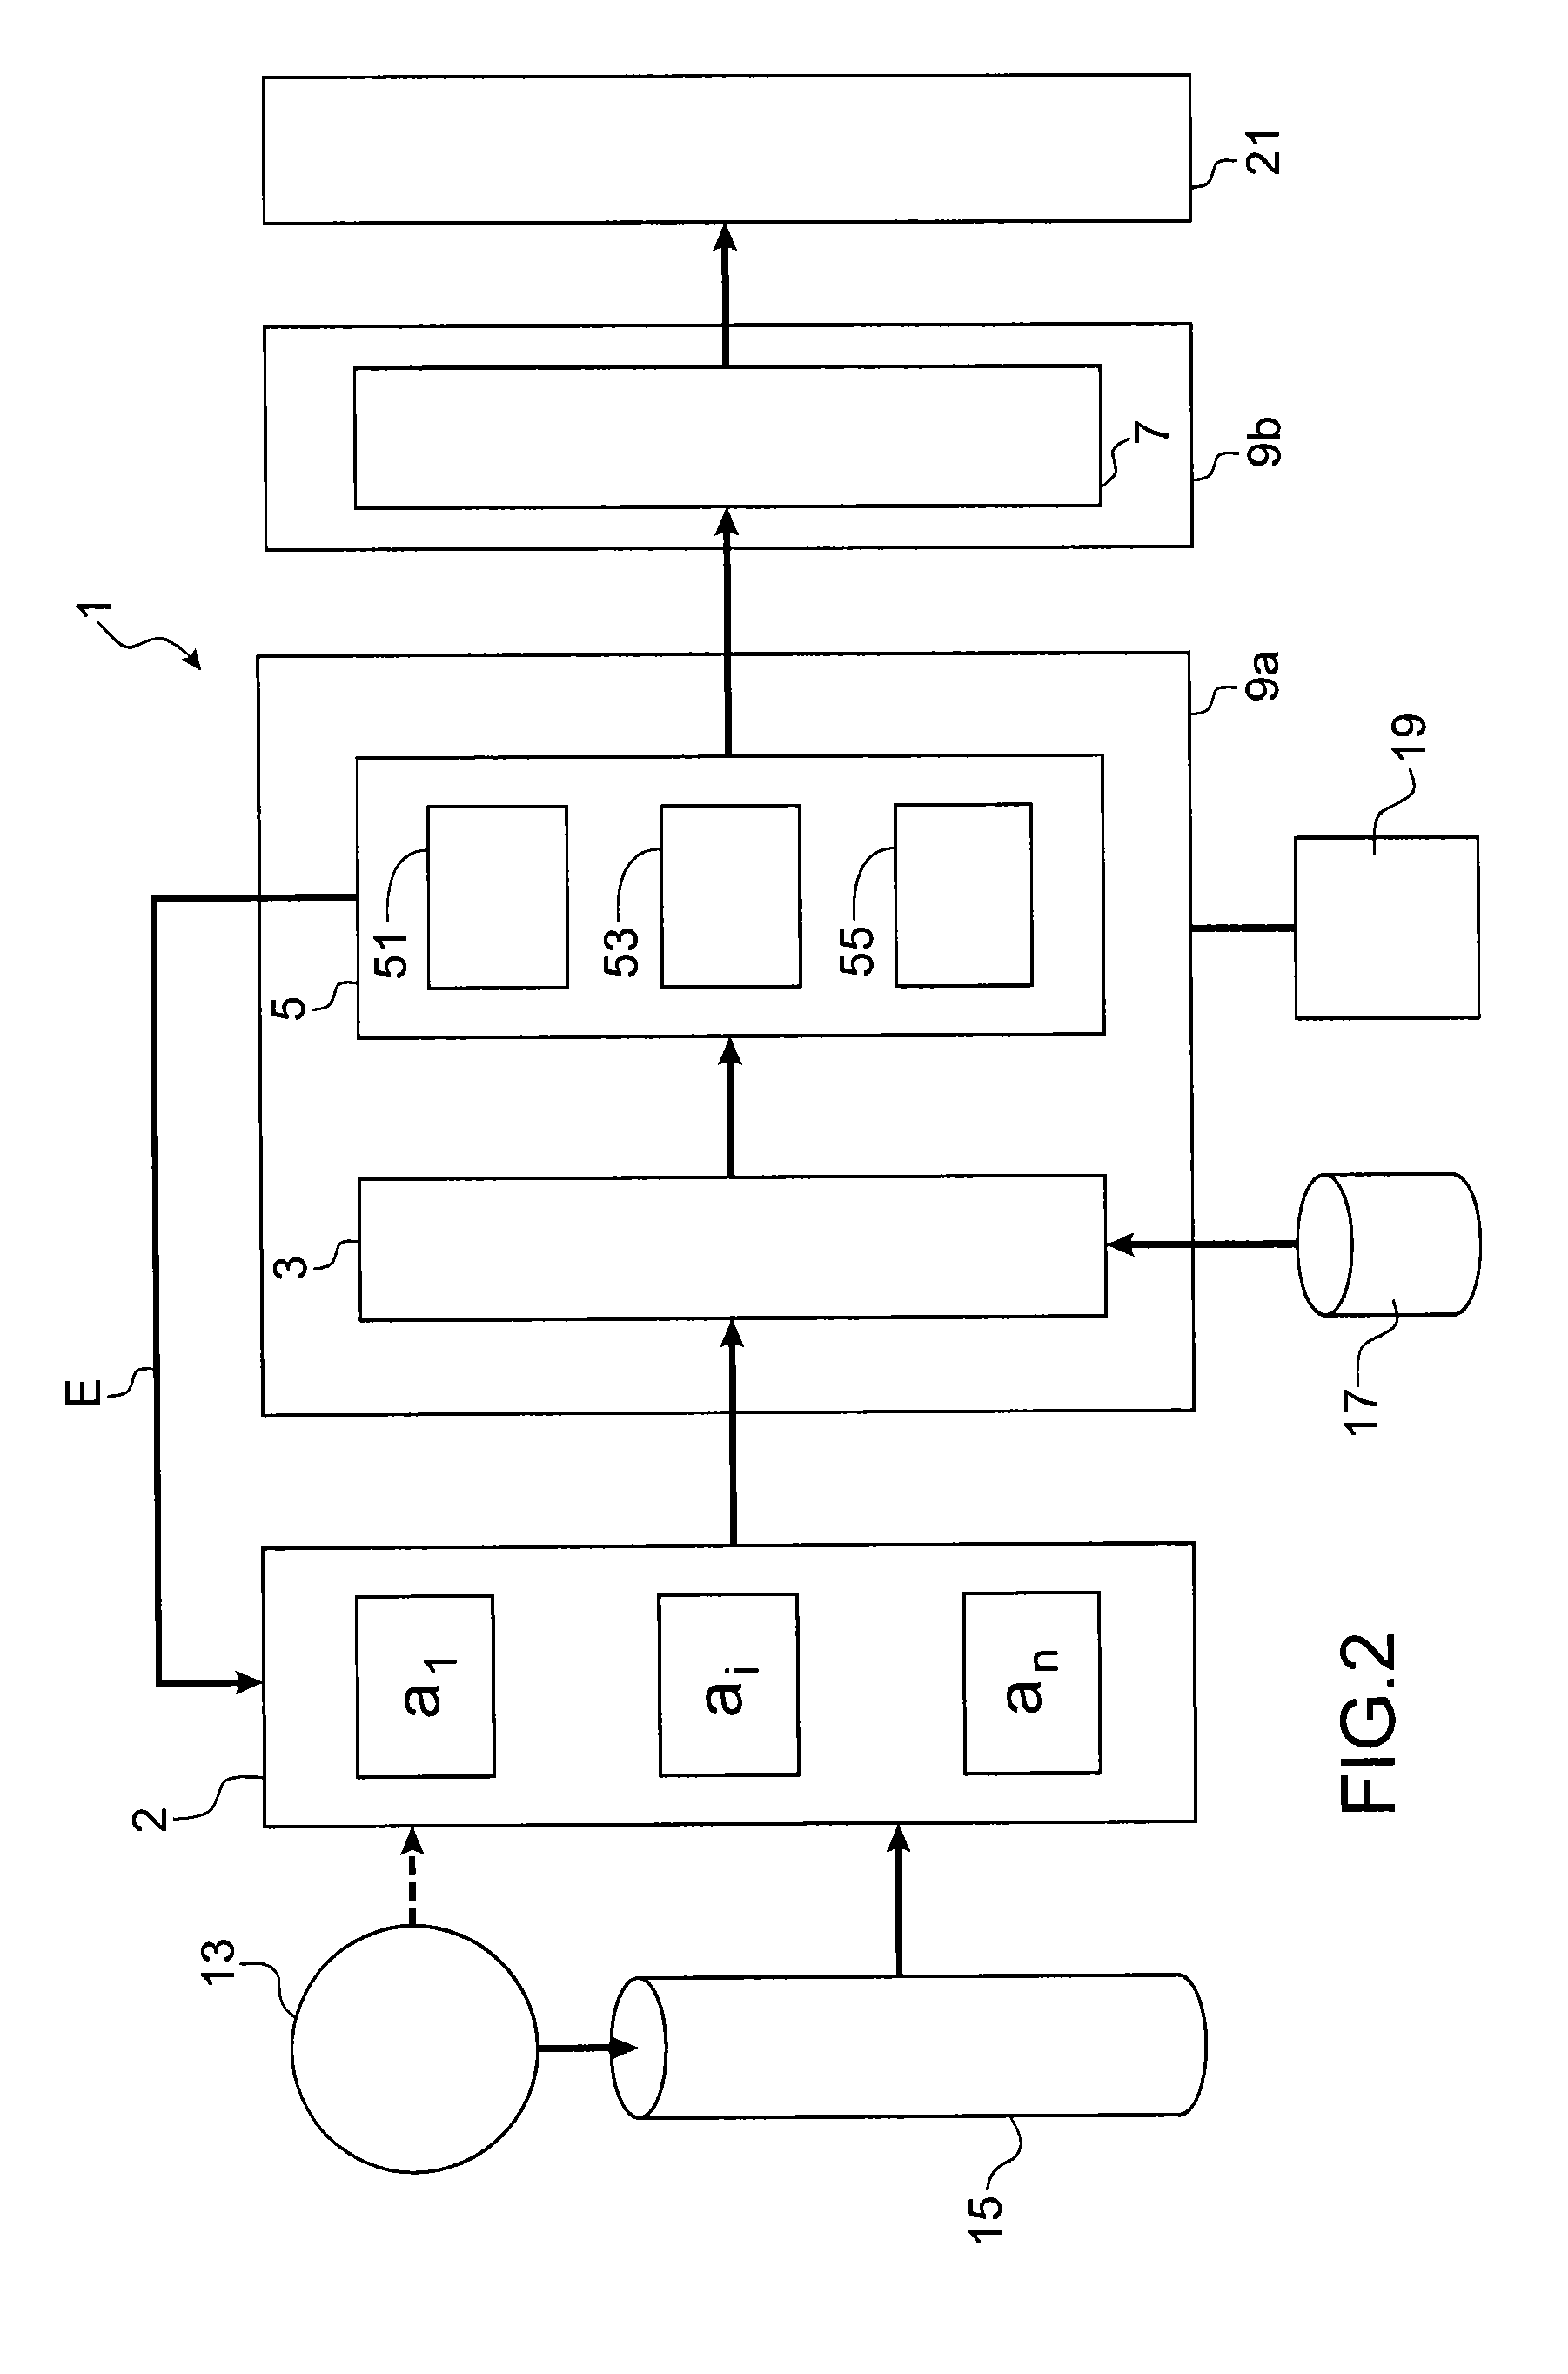 System for monitoring a set of components of a device